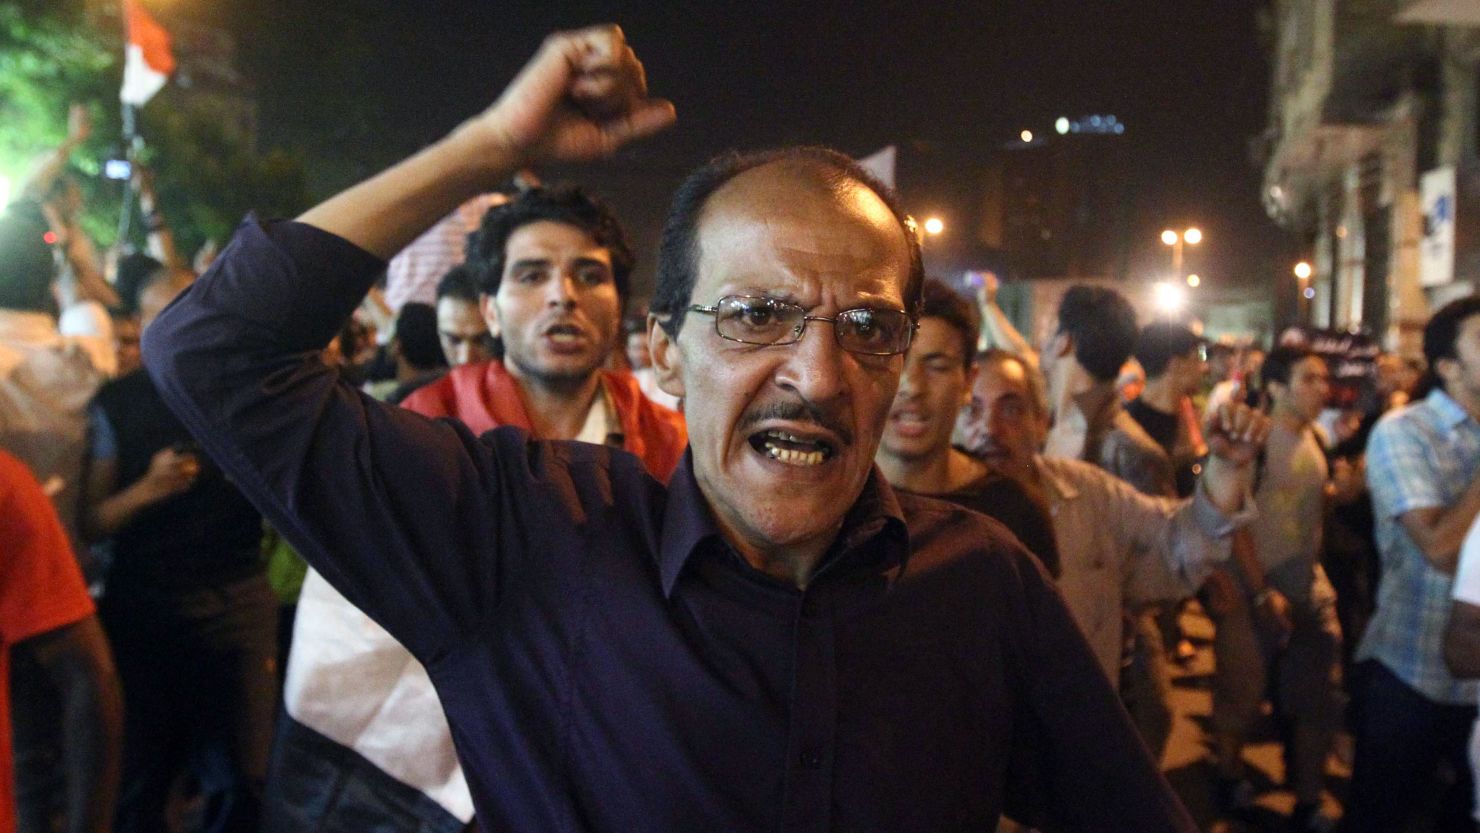 An Egyptian man shouts slogans during a demonstration Monday after the first round of elections in Cairo.